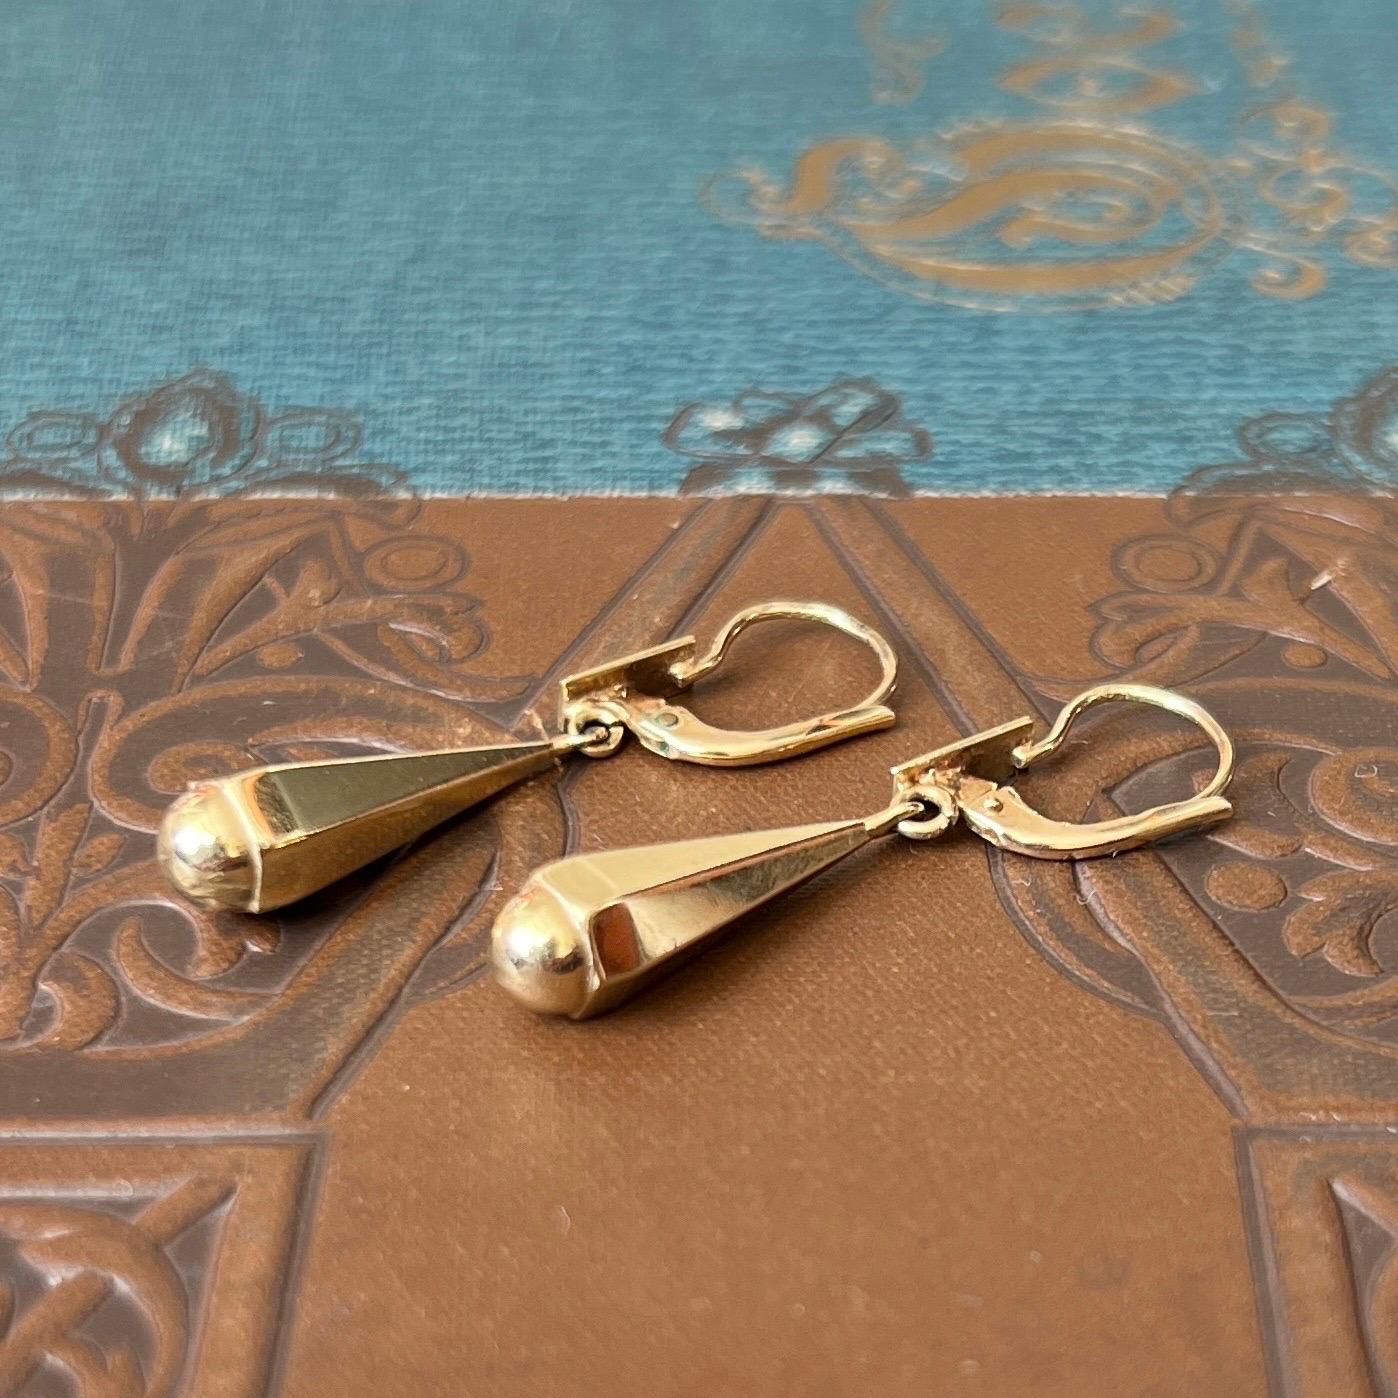 These beautiful vintage 14 karat yellow gold dangle earrings are designed in a tapered hexagon shape. The pendants are hollow cast and are formed in a hexagon and taper towards the top. The ear hooks have a small rectangular-shape applique and the